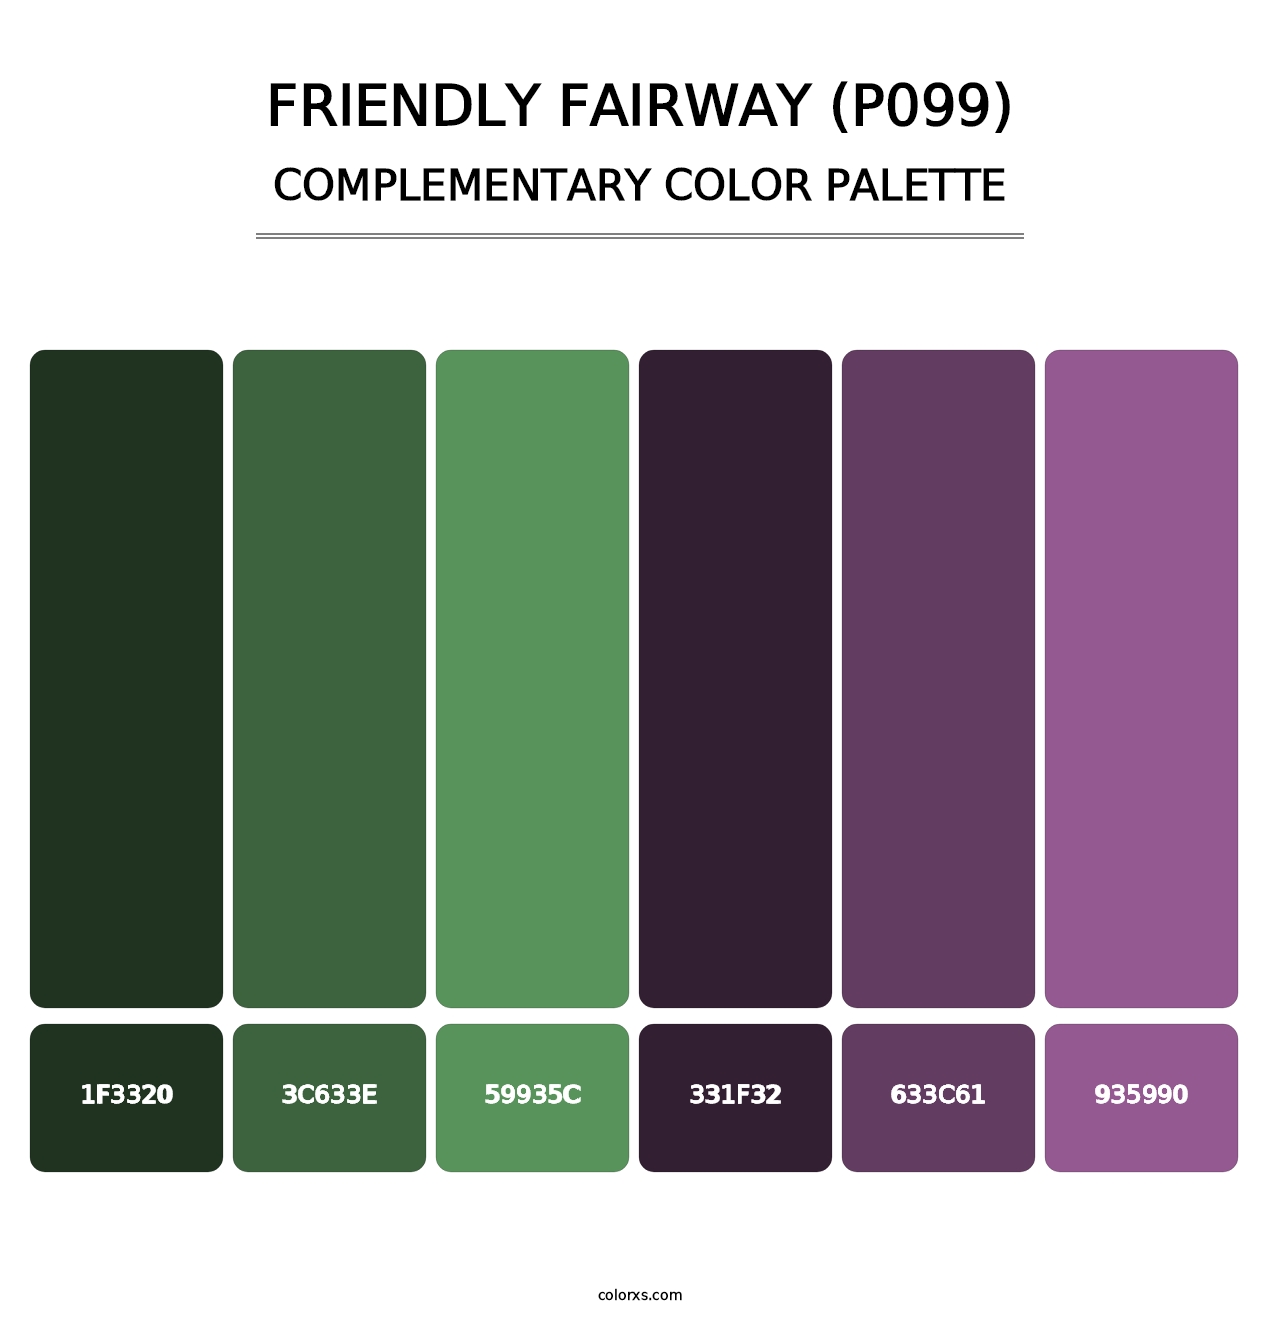 Friendly Fairway (P099) - Complementary Color Palette